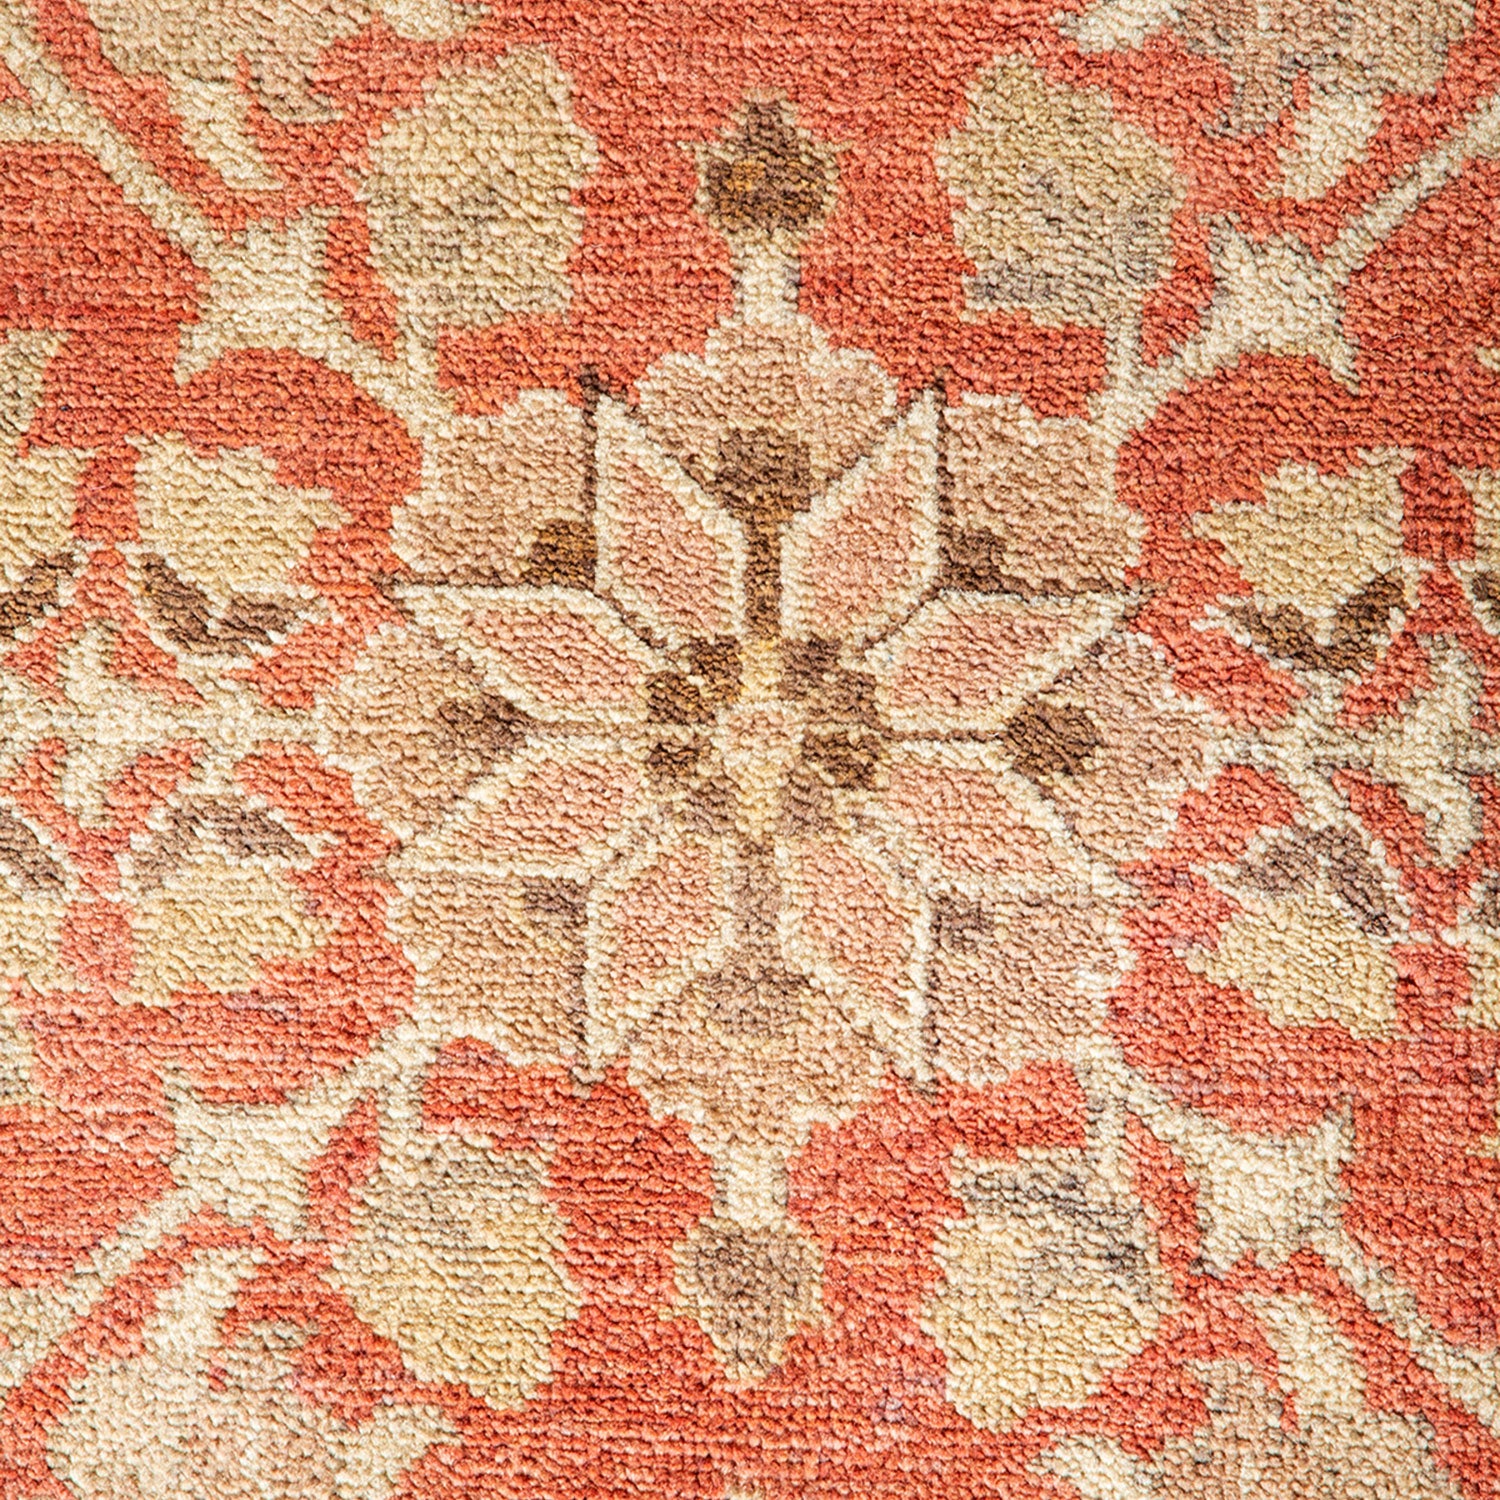 Close-up of an ornate textile with a traditional floral pattern